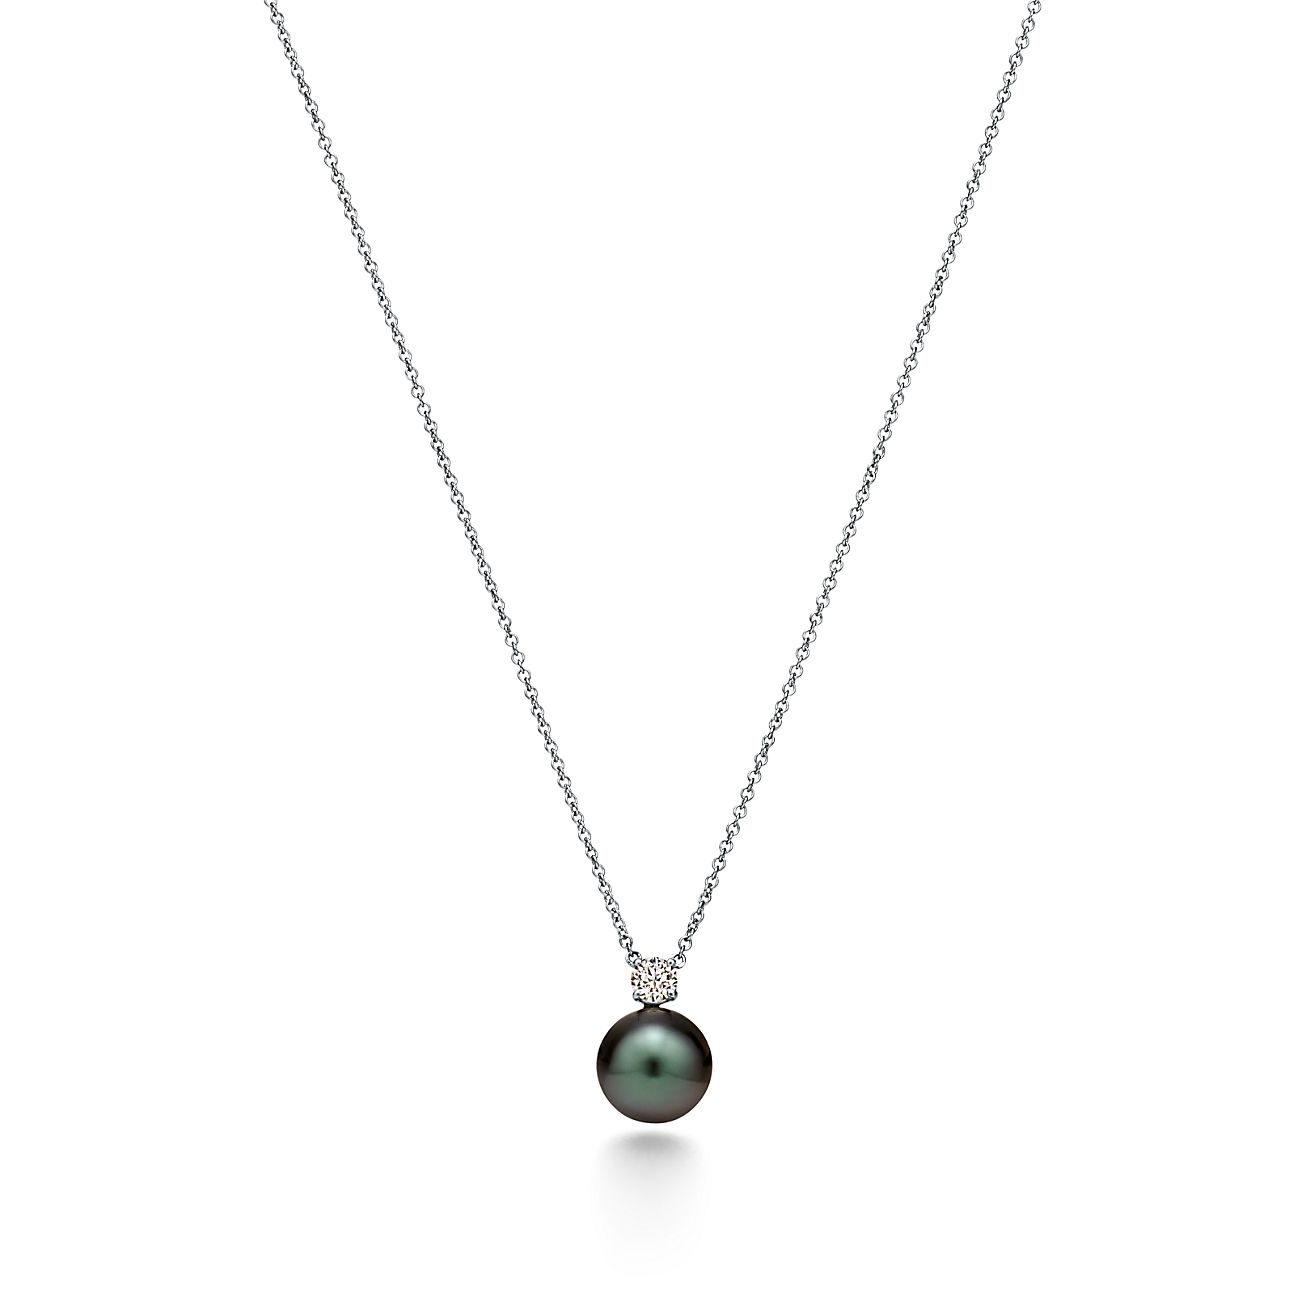 Tahitian Black Pearl Necklace — Your Most Trusted Brand for Fine Jewelry &  Custom Design in Yardley, PA